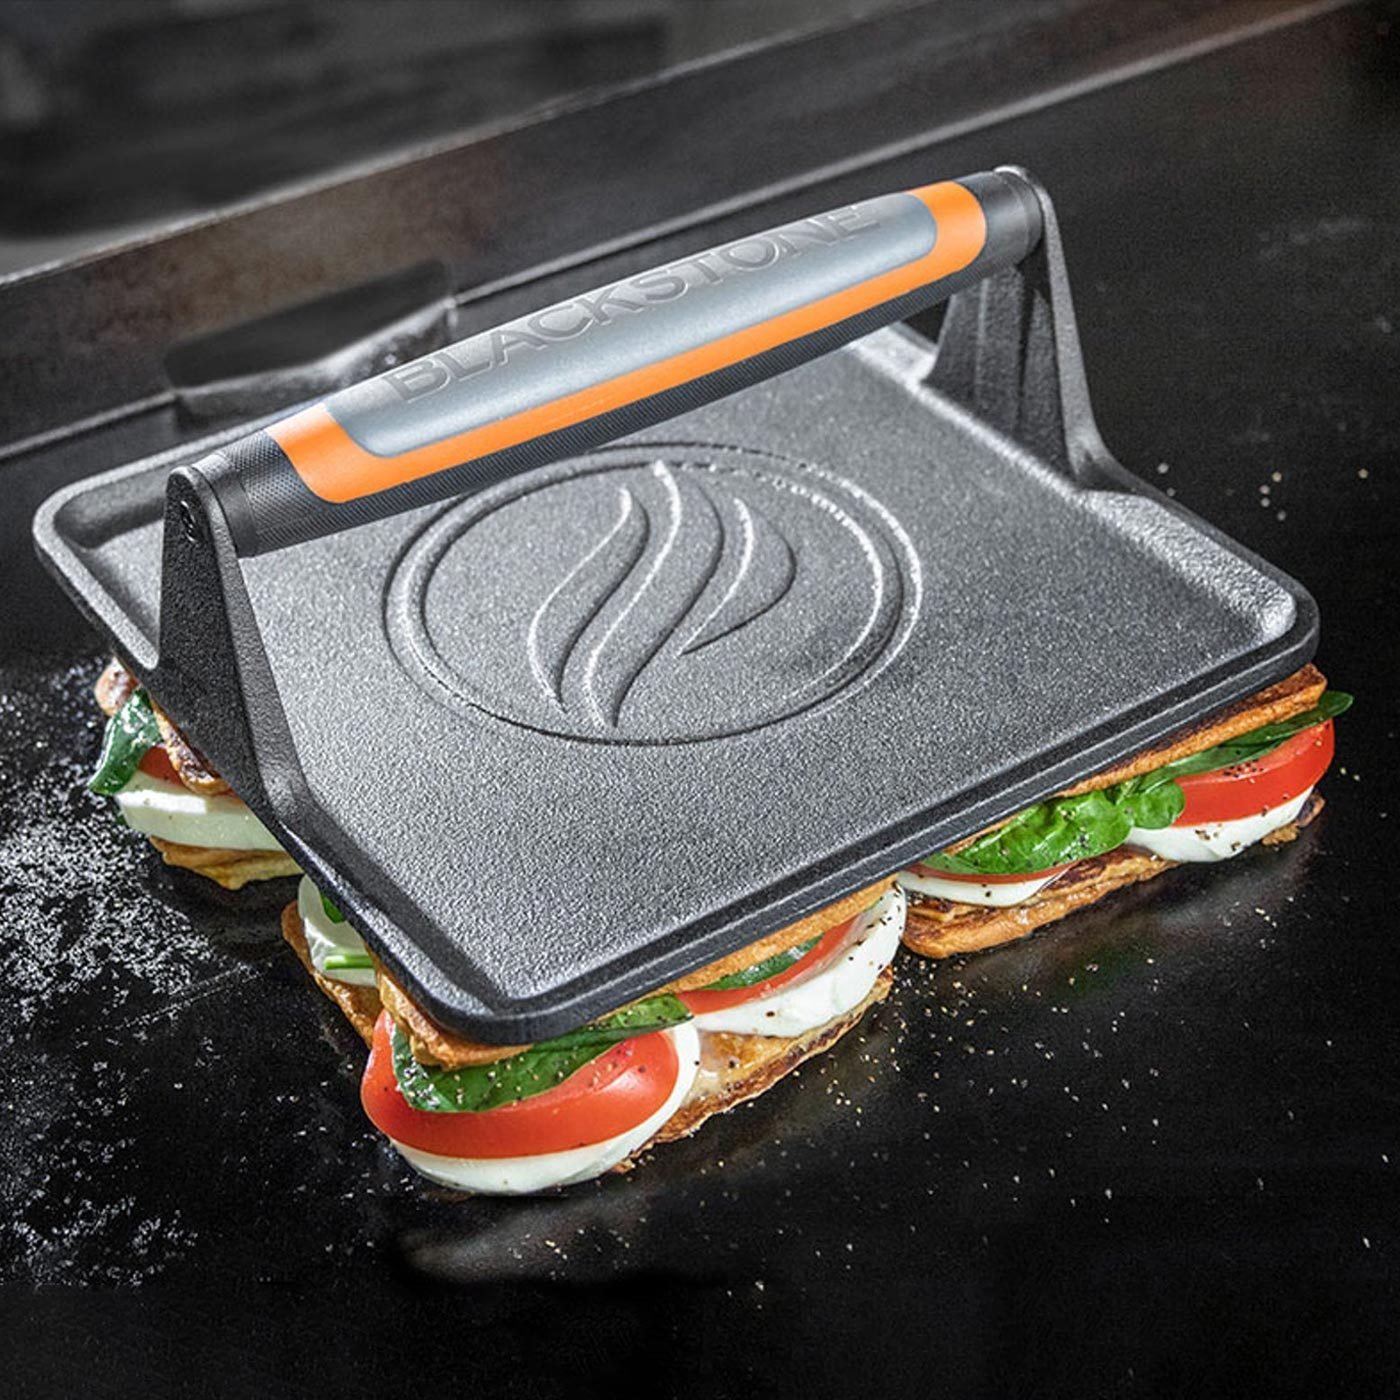 https://www.familyhandyman.com/wp-content/uploads/2023/02/All-the-Blackstone-Accessories-You-Need-for-Grilling-this-Spring-and-Summer_FT_via-walmart.com_.jpg